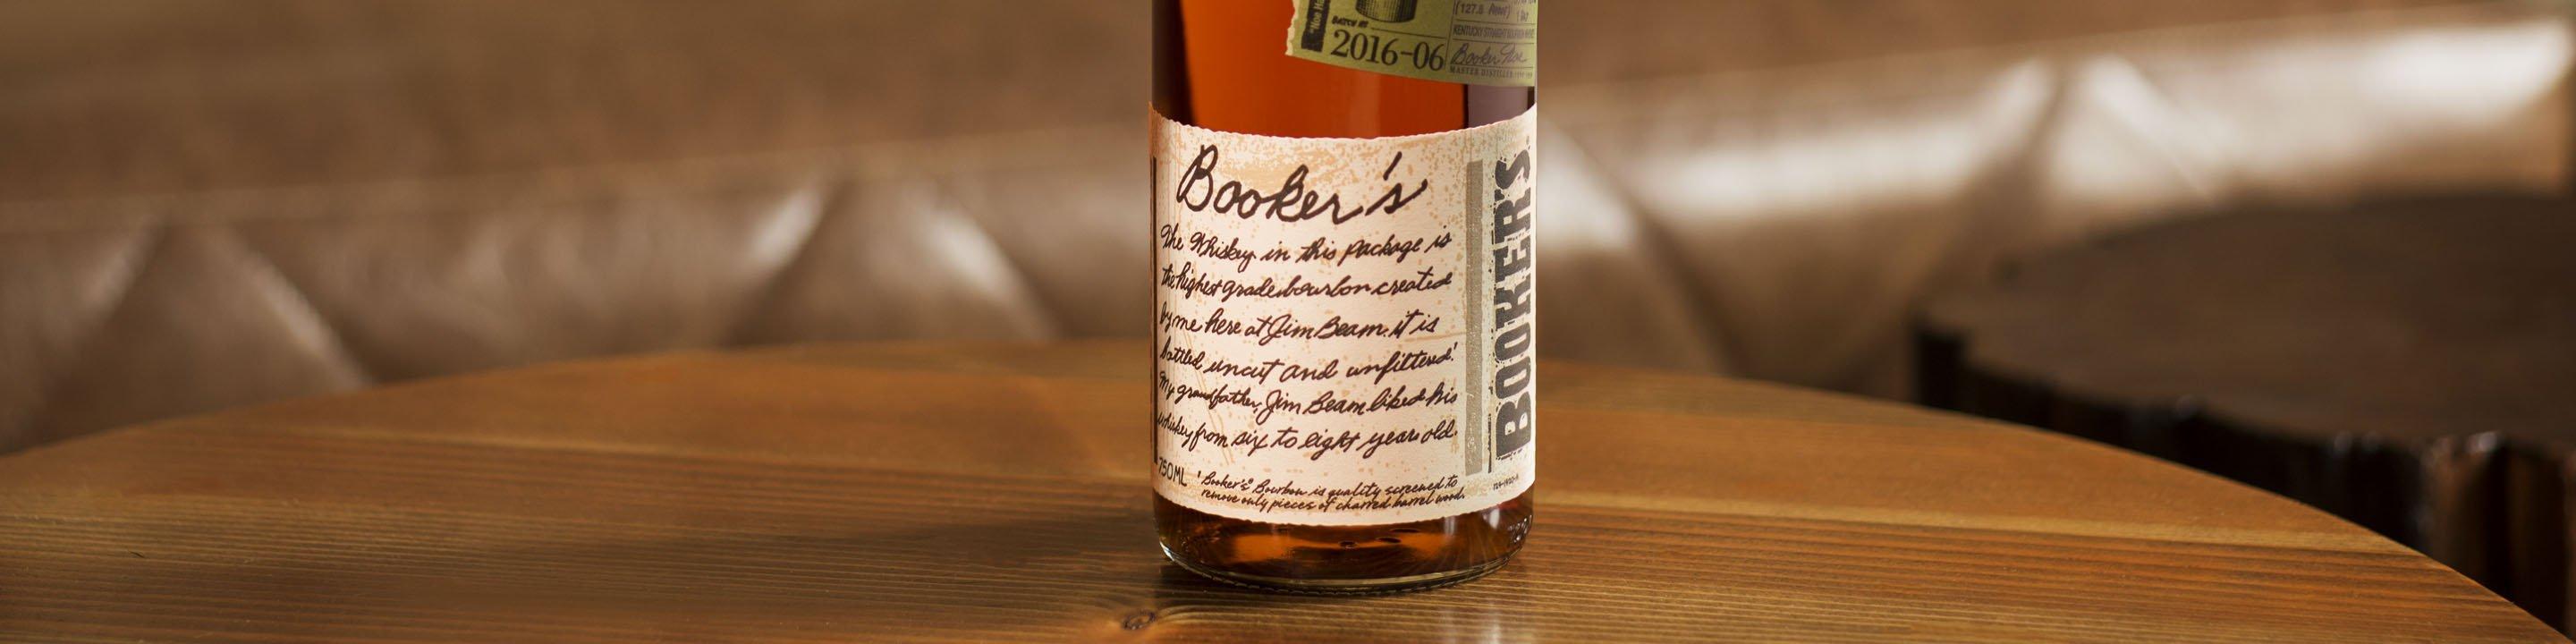 Discover Booker's® Bourbon, a small batch bourbon whiskey. Learn more about our cask strength bourbon, tasting notes, and more!

Buy Booker's online now from nearby liquor stores via Minibar Delivery.